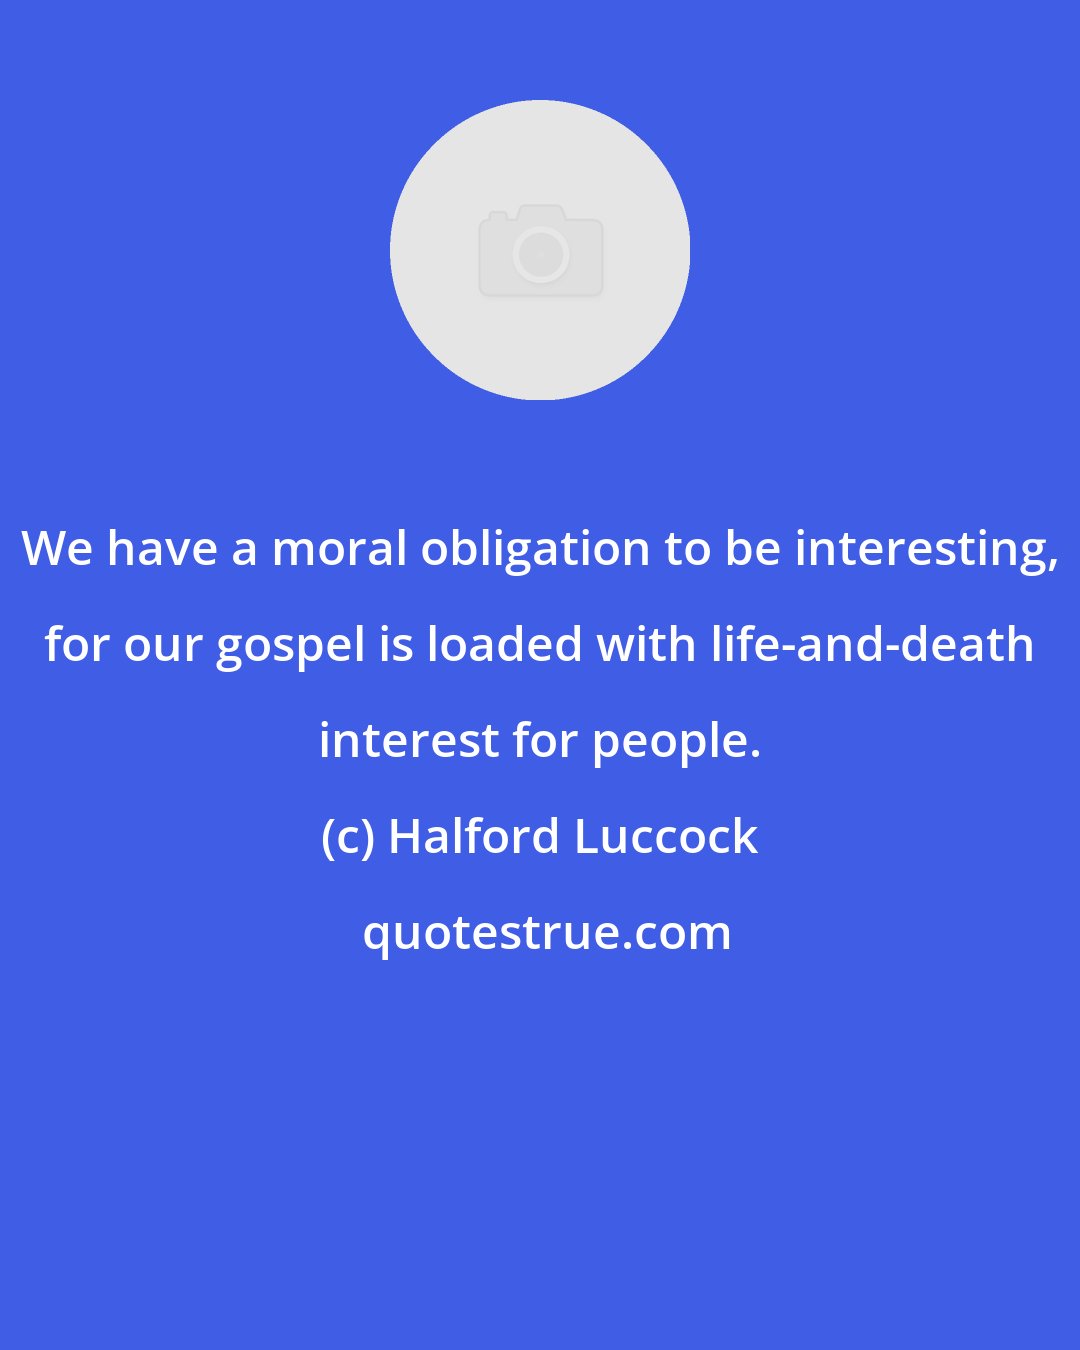 Halford Luccock: We have a moral obligation to be interesting, for our gospel is loaded with life-and-death interest for people.